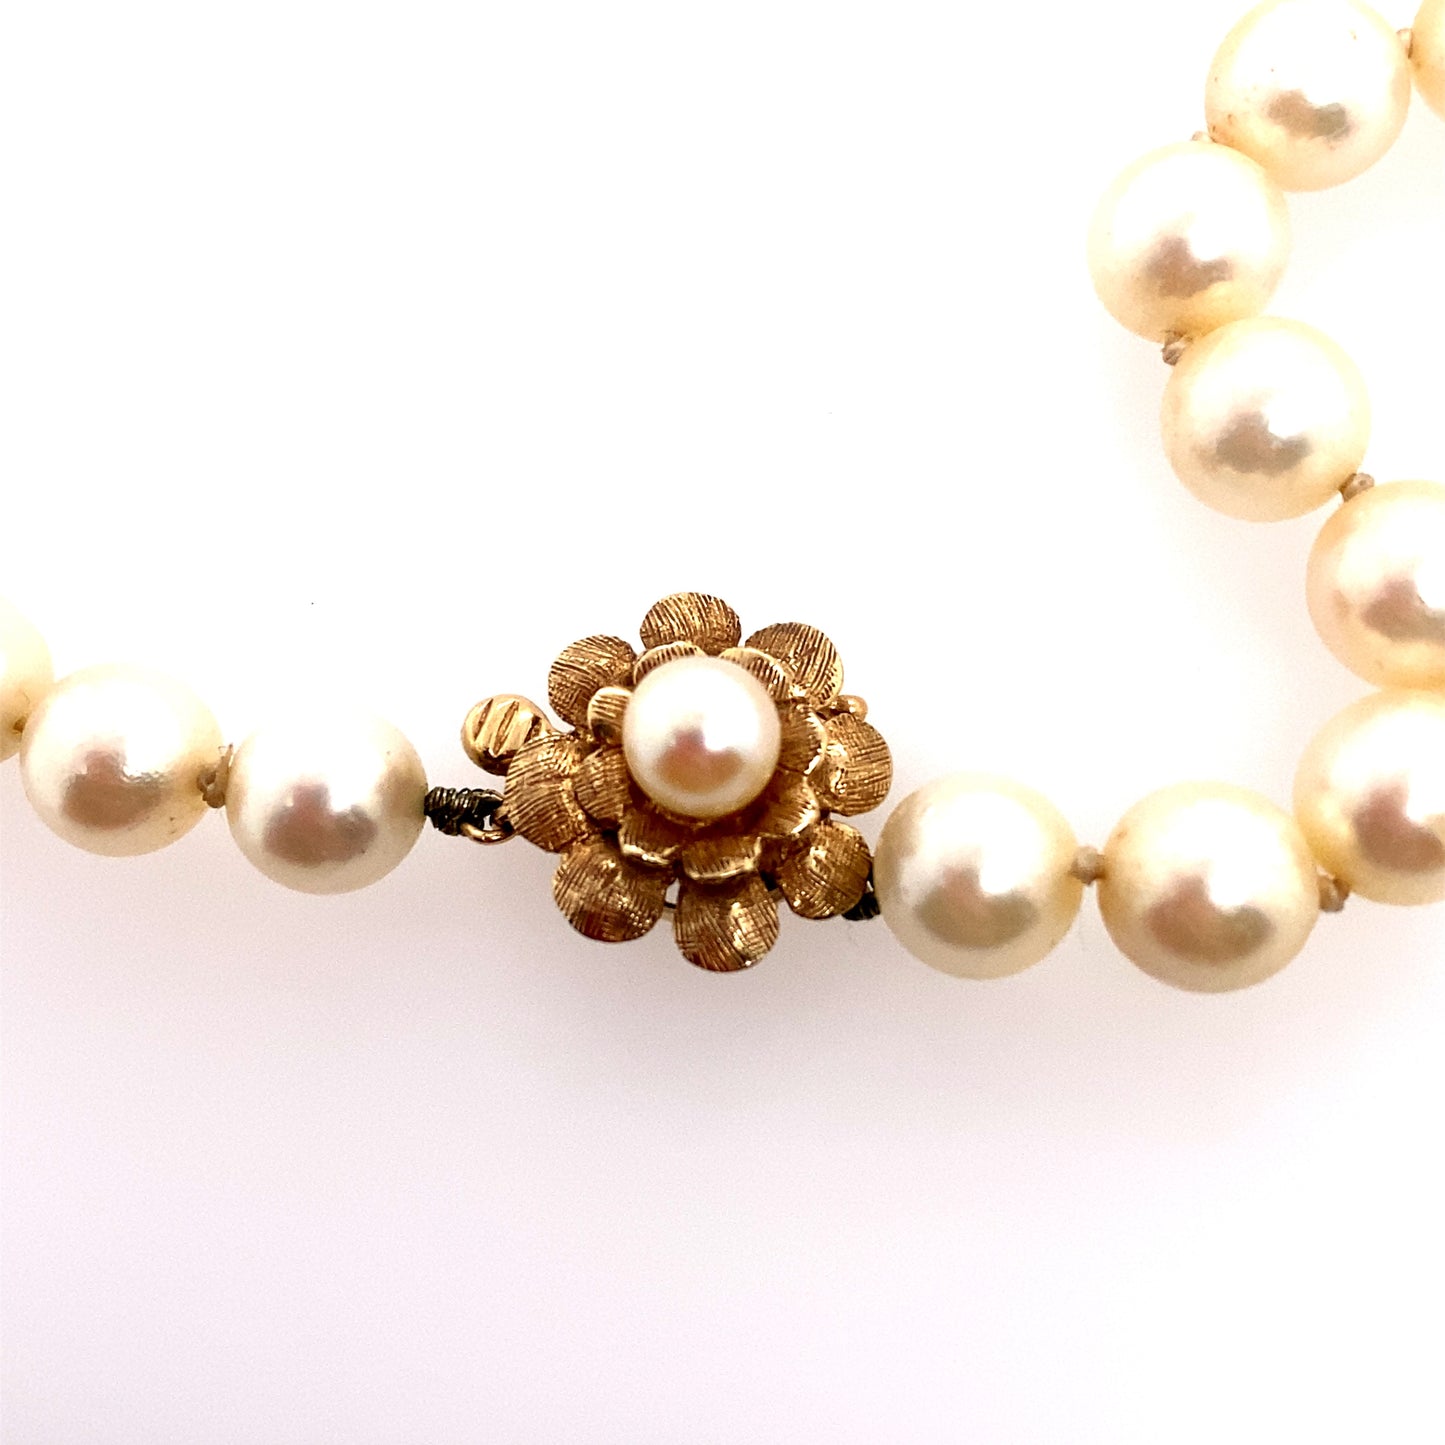 Circa 1980 15" 8mm Pearl Strand with Flower Clasp in 14K Gold